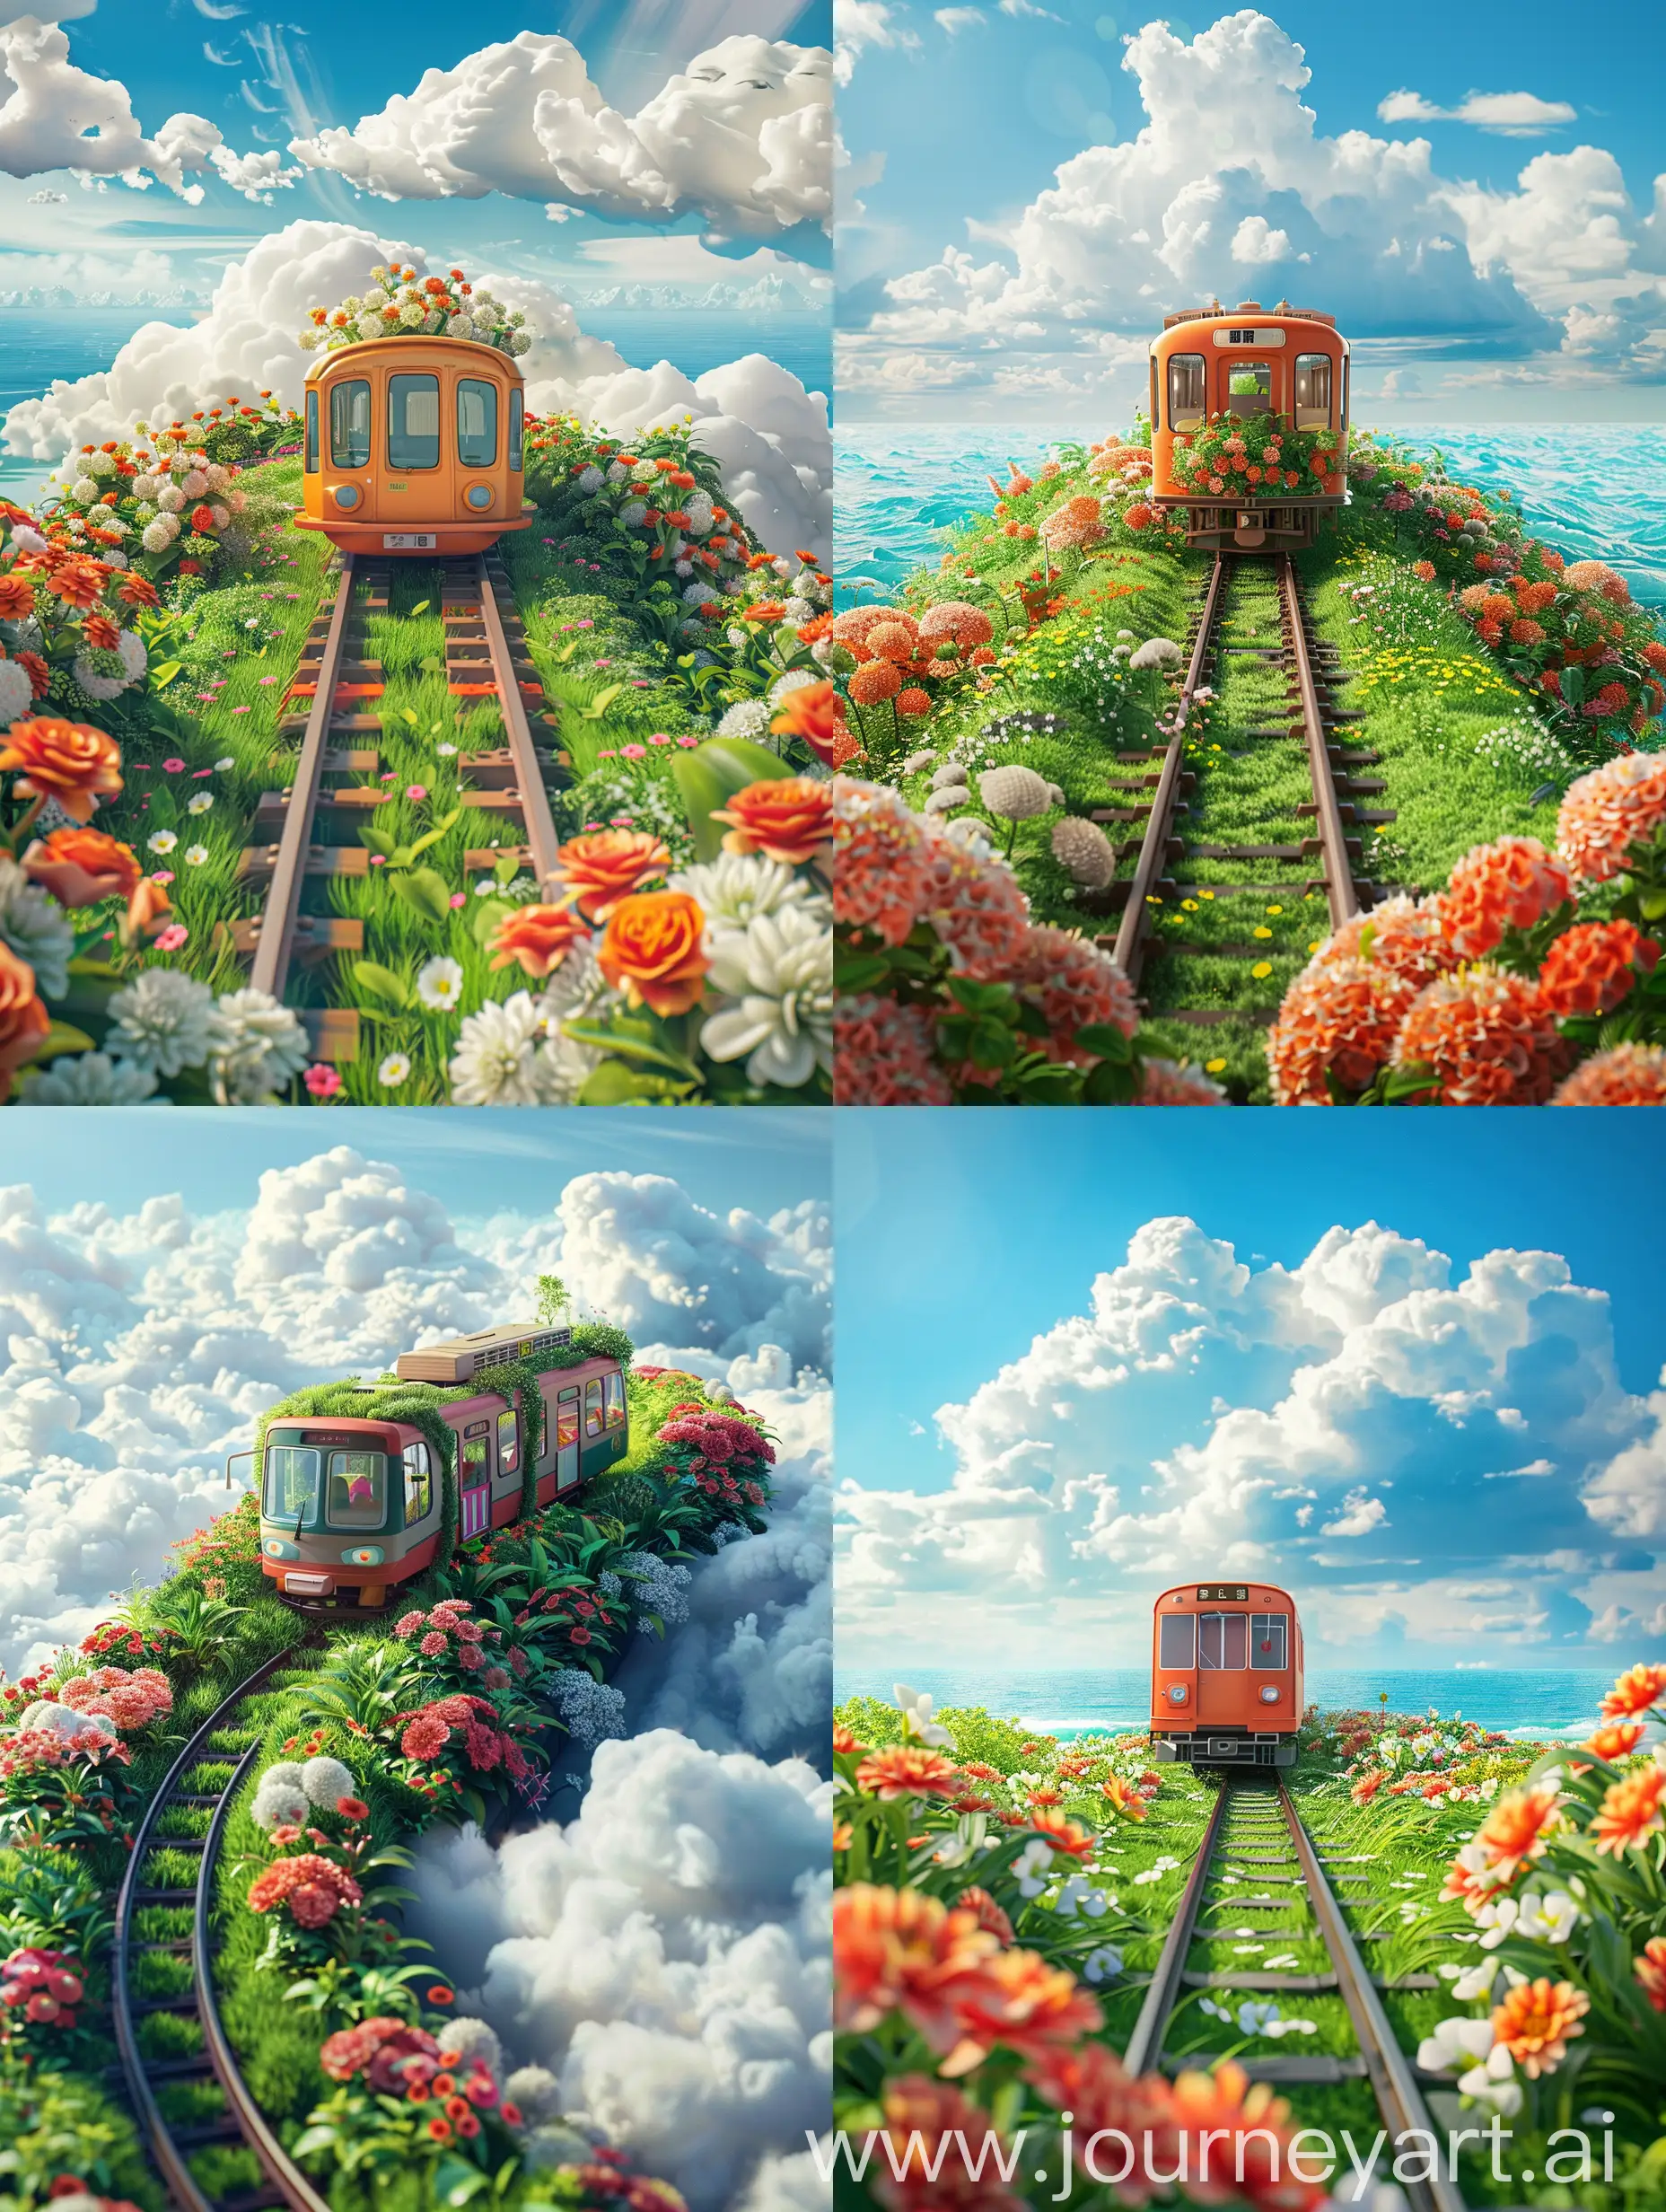 cartoon metro on the tracks, surrounded by flowers, on top green grass, dreamlike visuals, soft sculptures, bright colors, bold shapes, coastal landscapes, capturing moments, Hayao Miyazaki style landscape white clouds 

